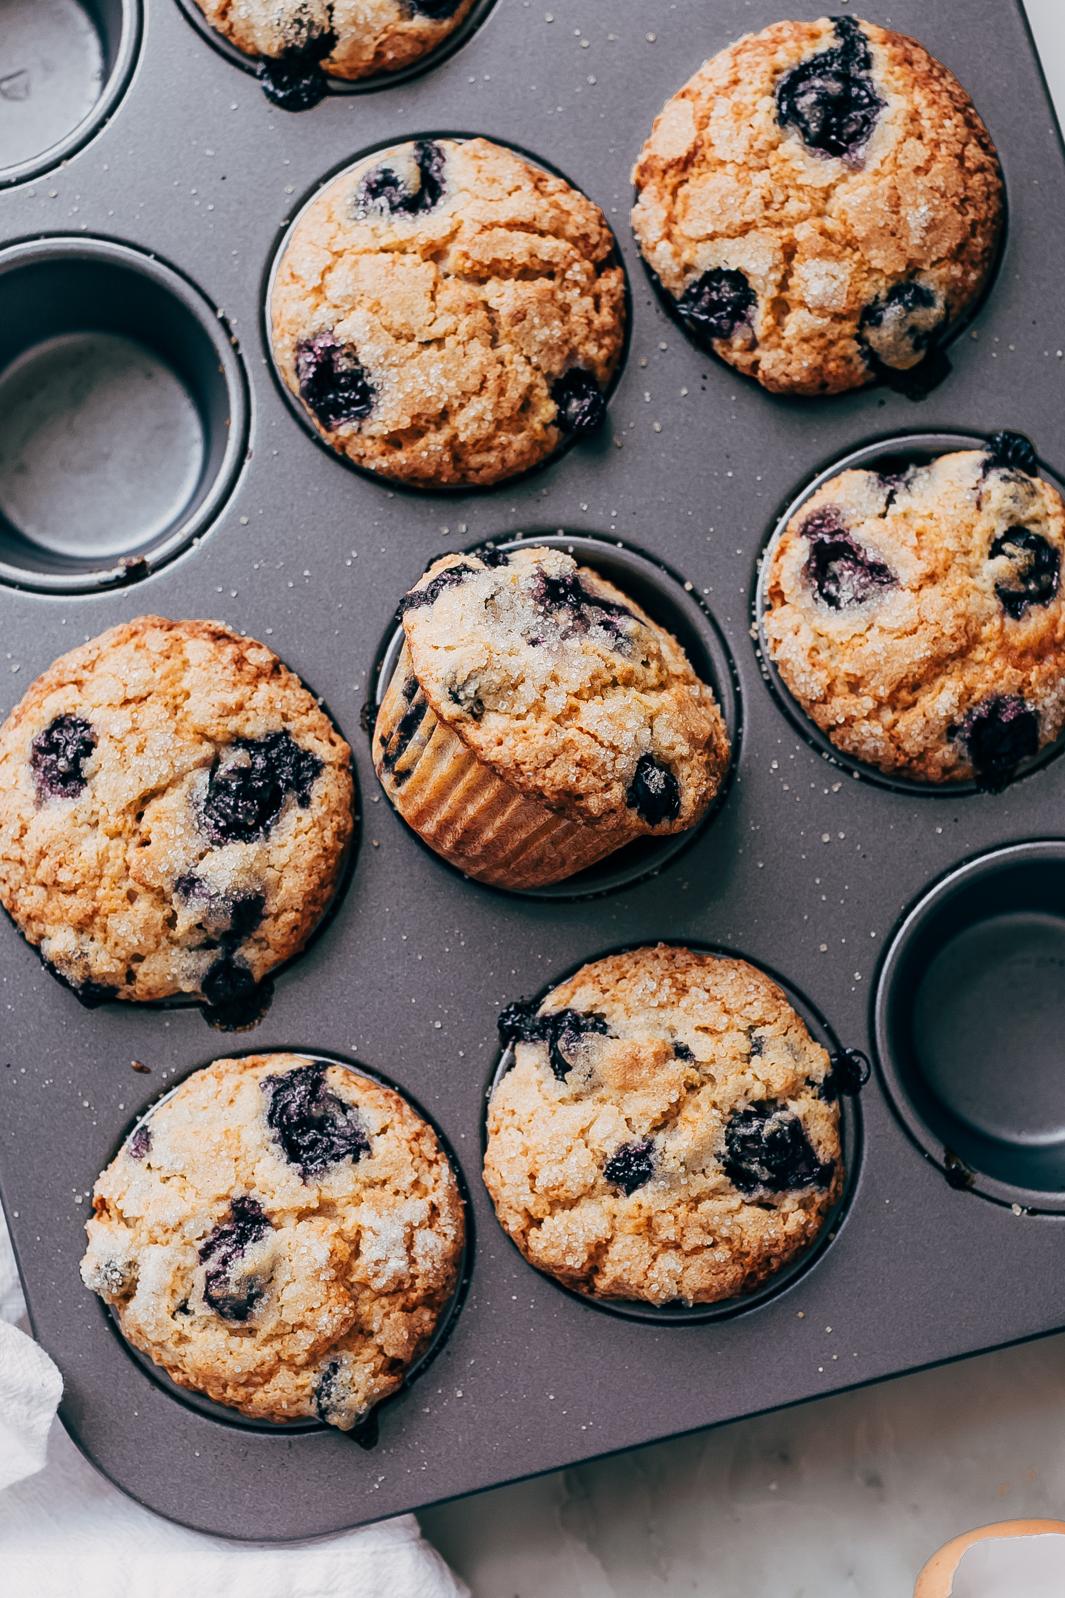  Baked to golden perfection, these spiced flax blueberry muffins are a healthy breakfast treat that will put a smile on your face.